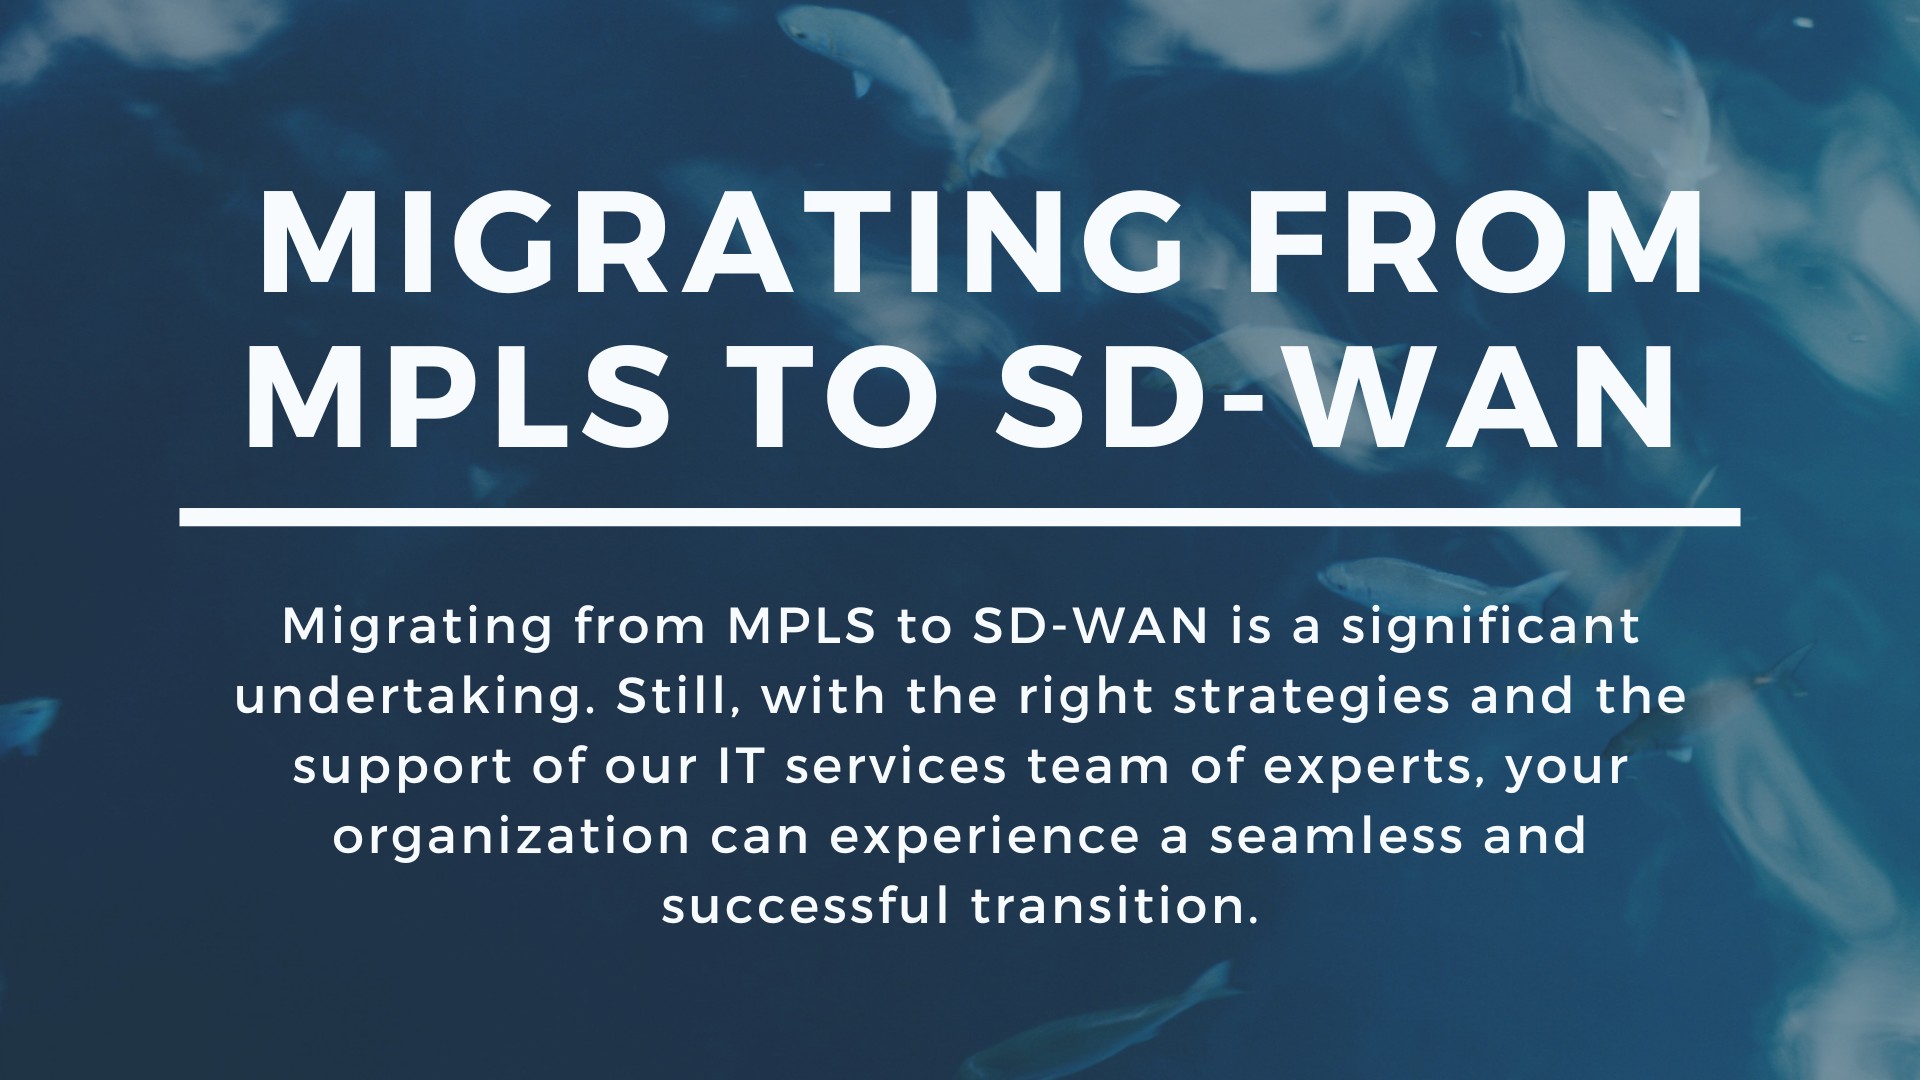 5 Essential Strategies for Migrating from MPLS to SD-WAN